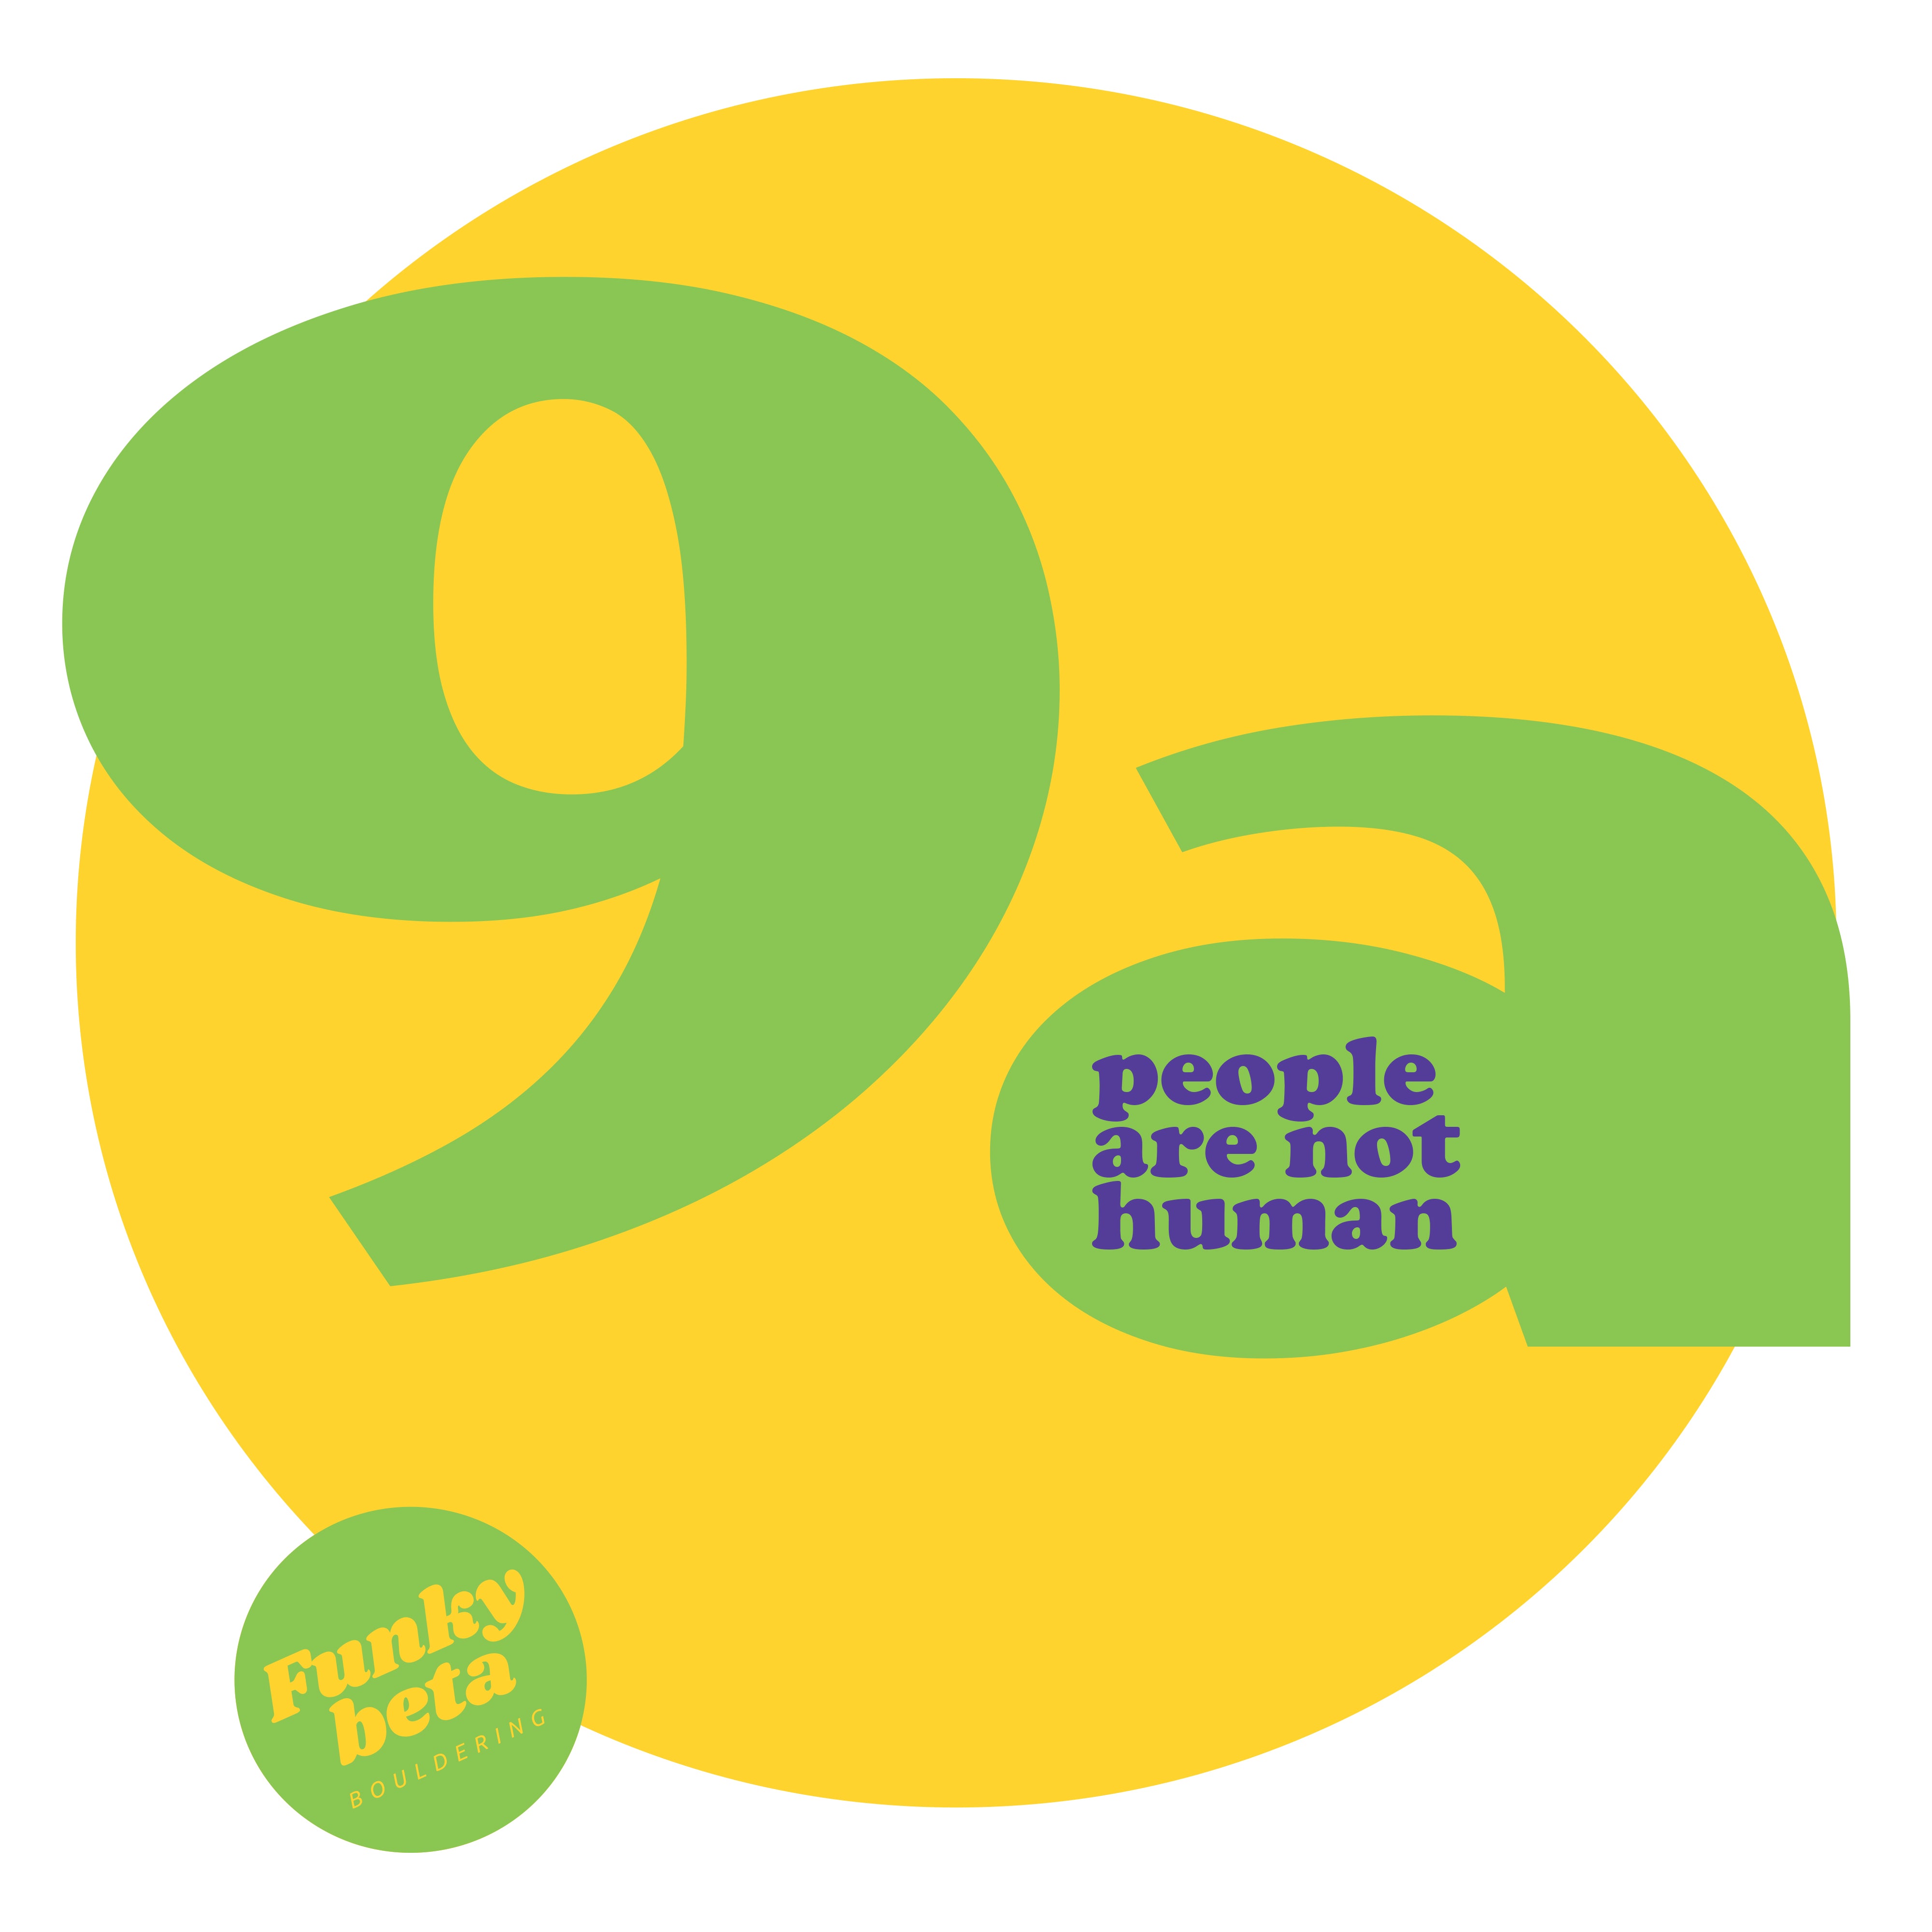 9a people are not human